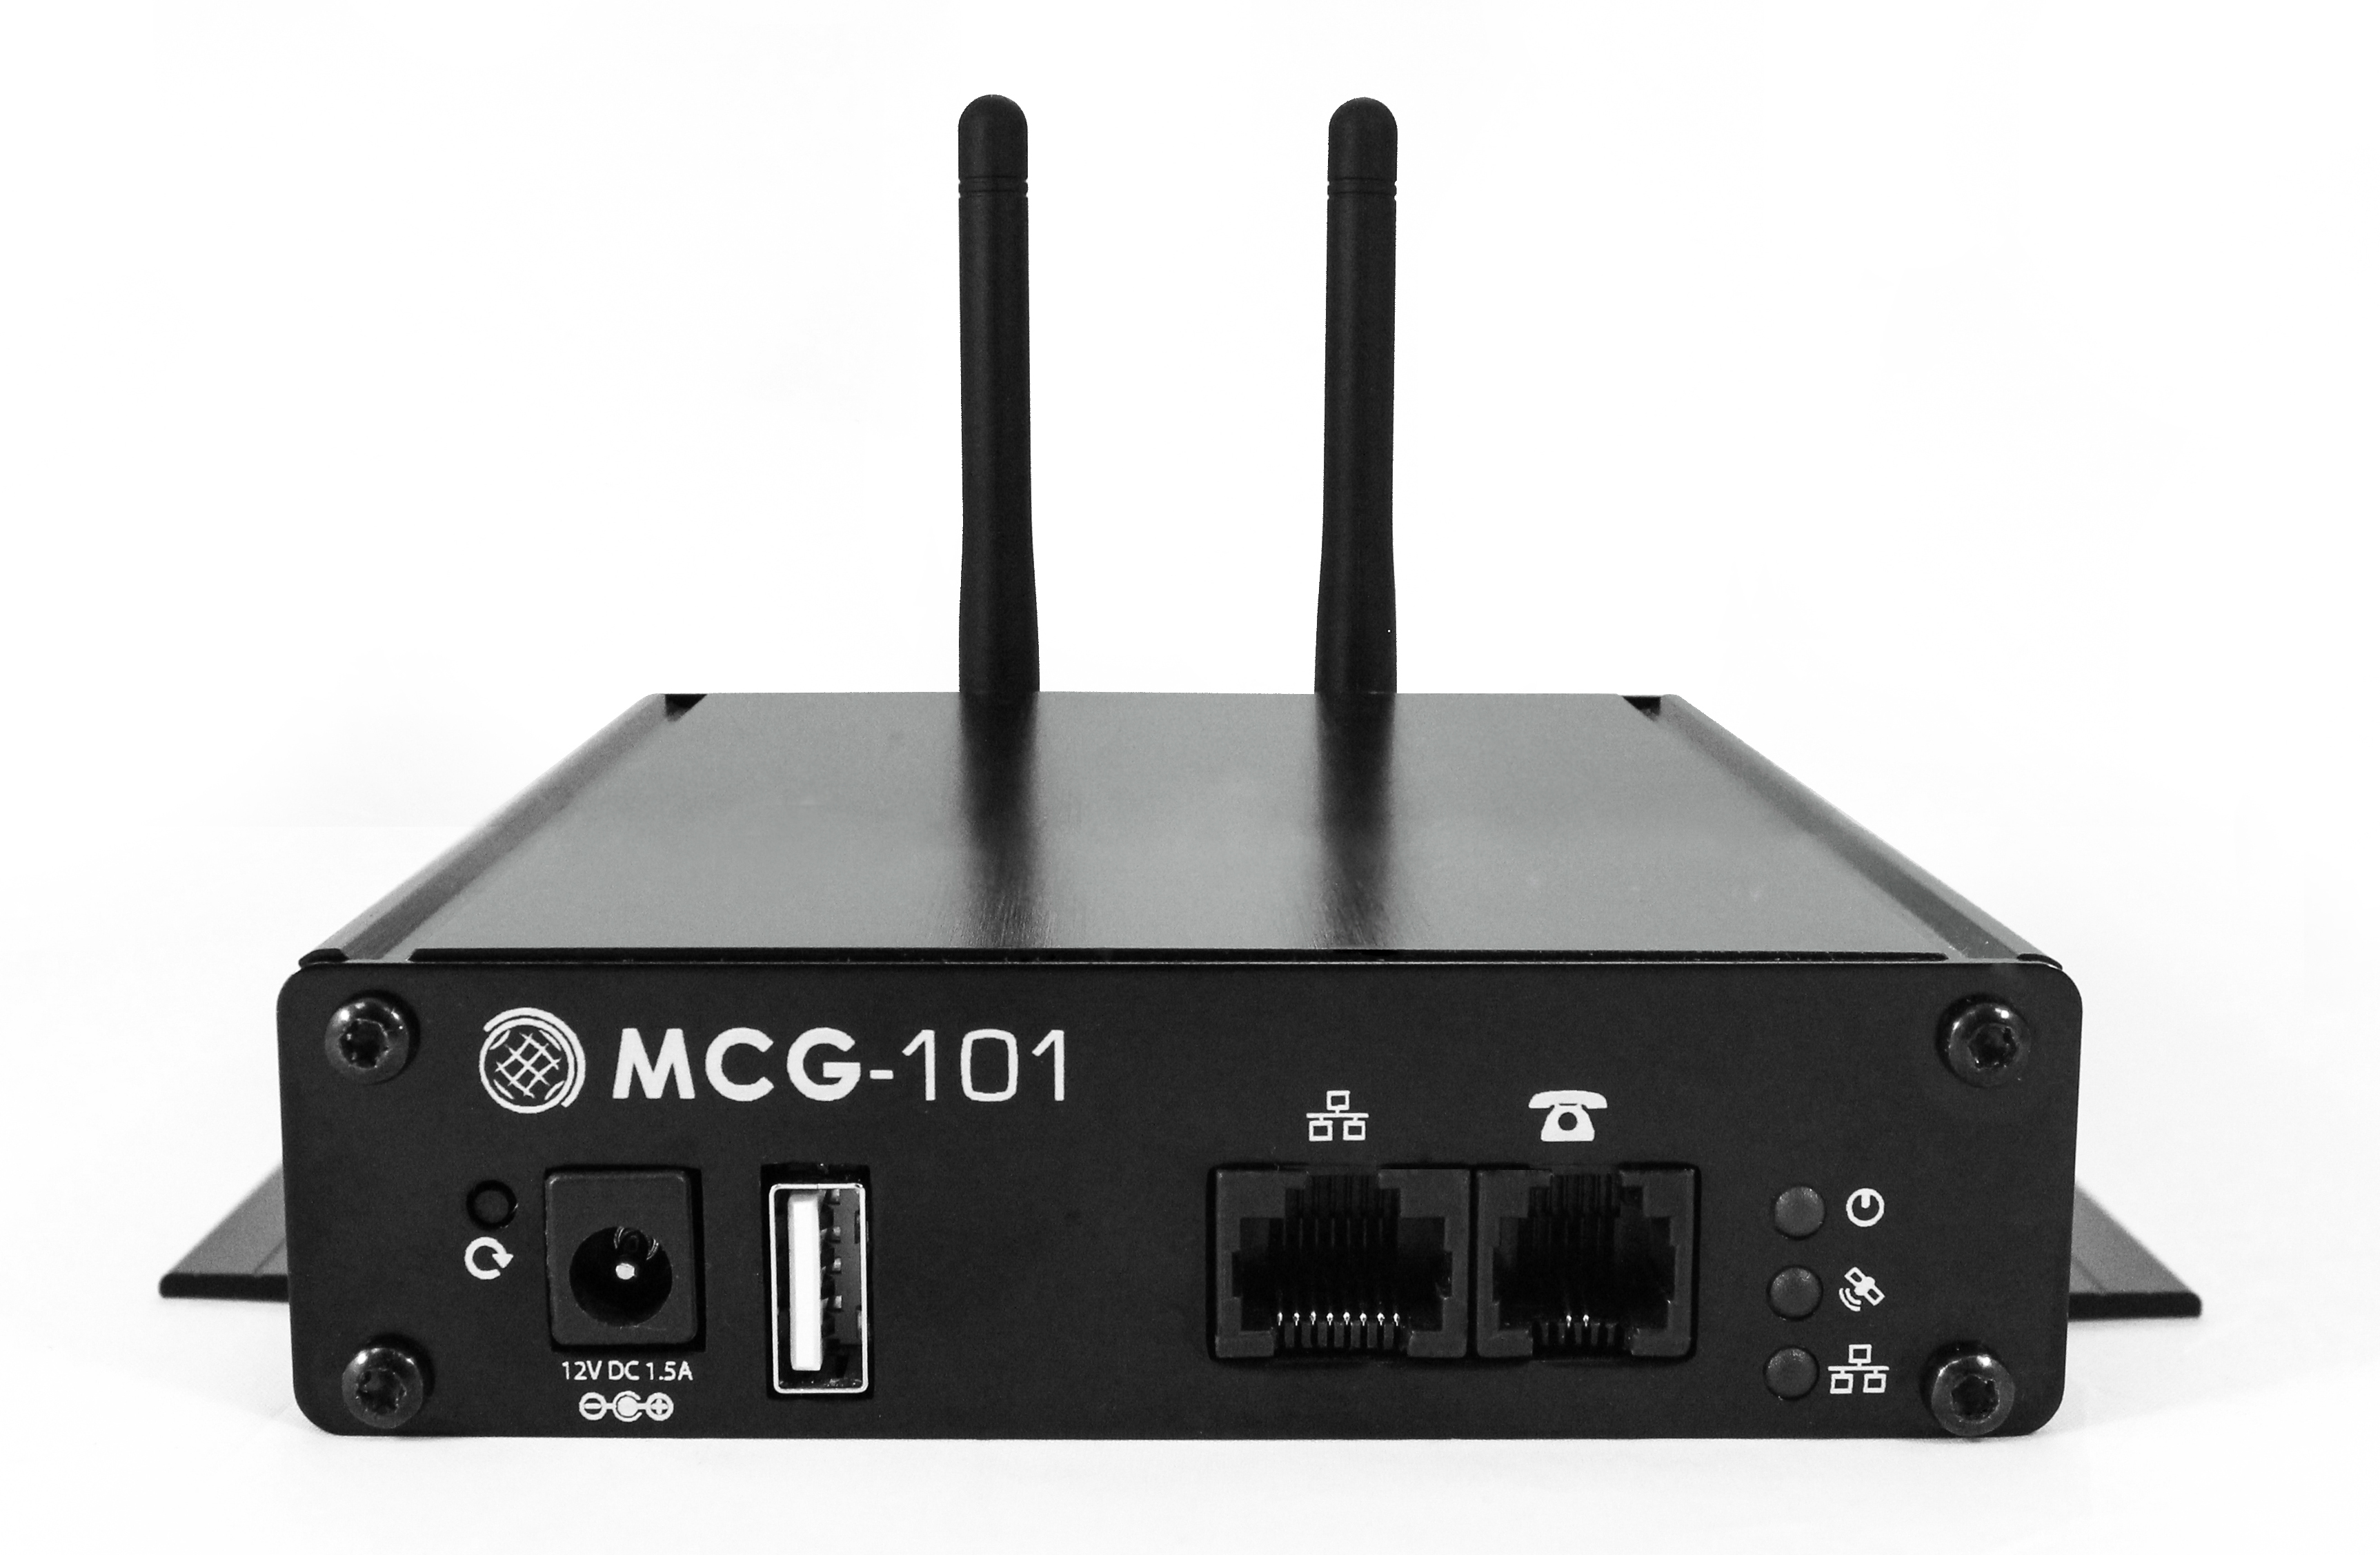 MCG-101 Front View with Antennas